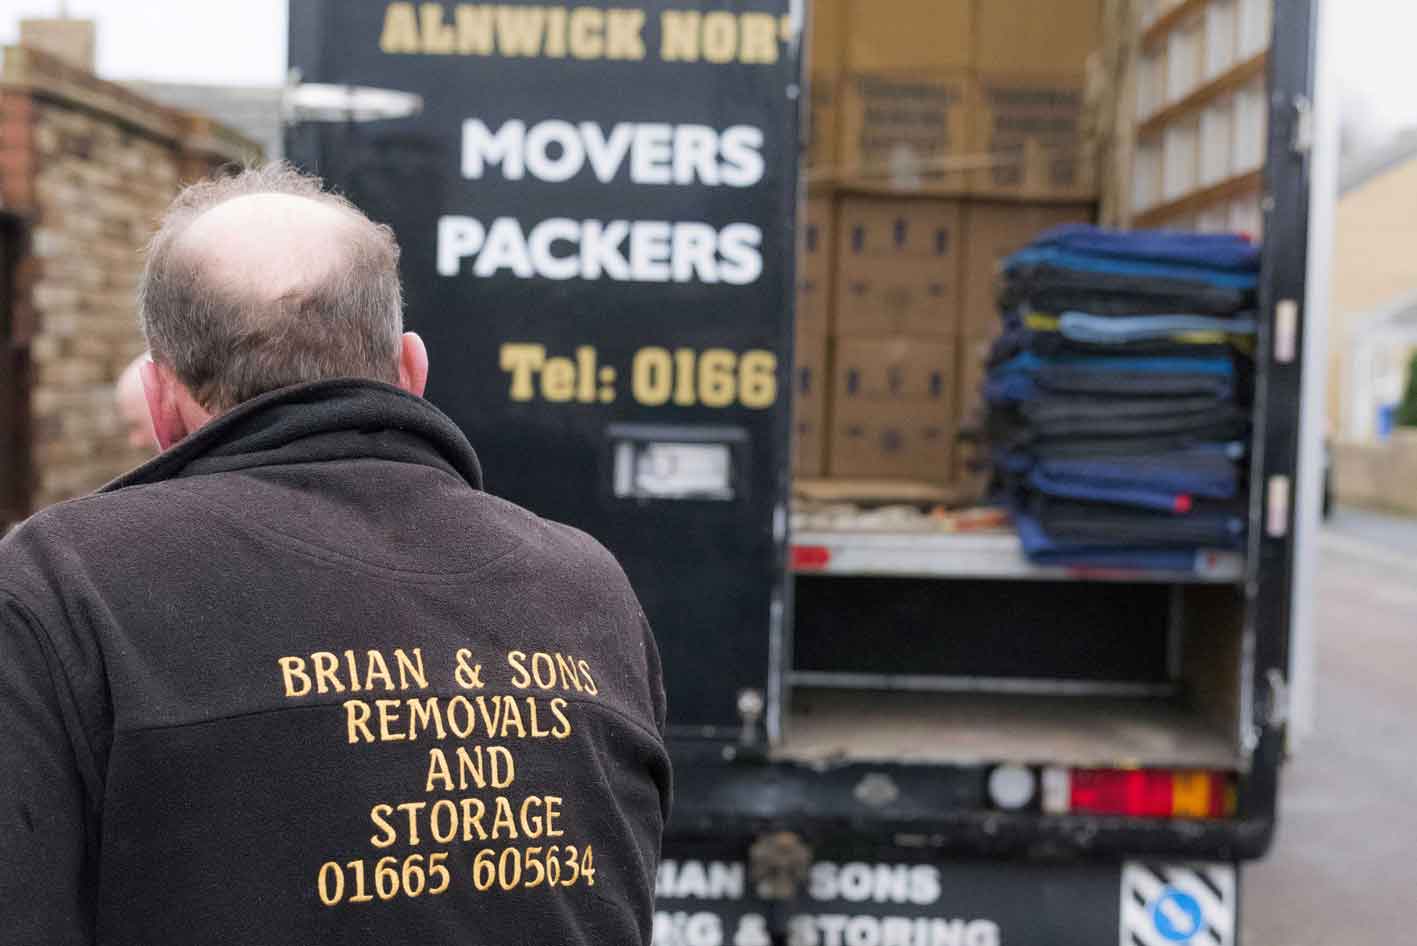 Loading the Truck at Brian and Sons Removals